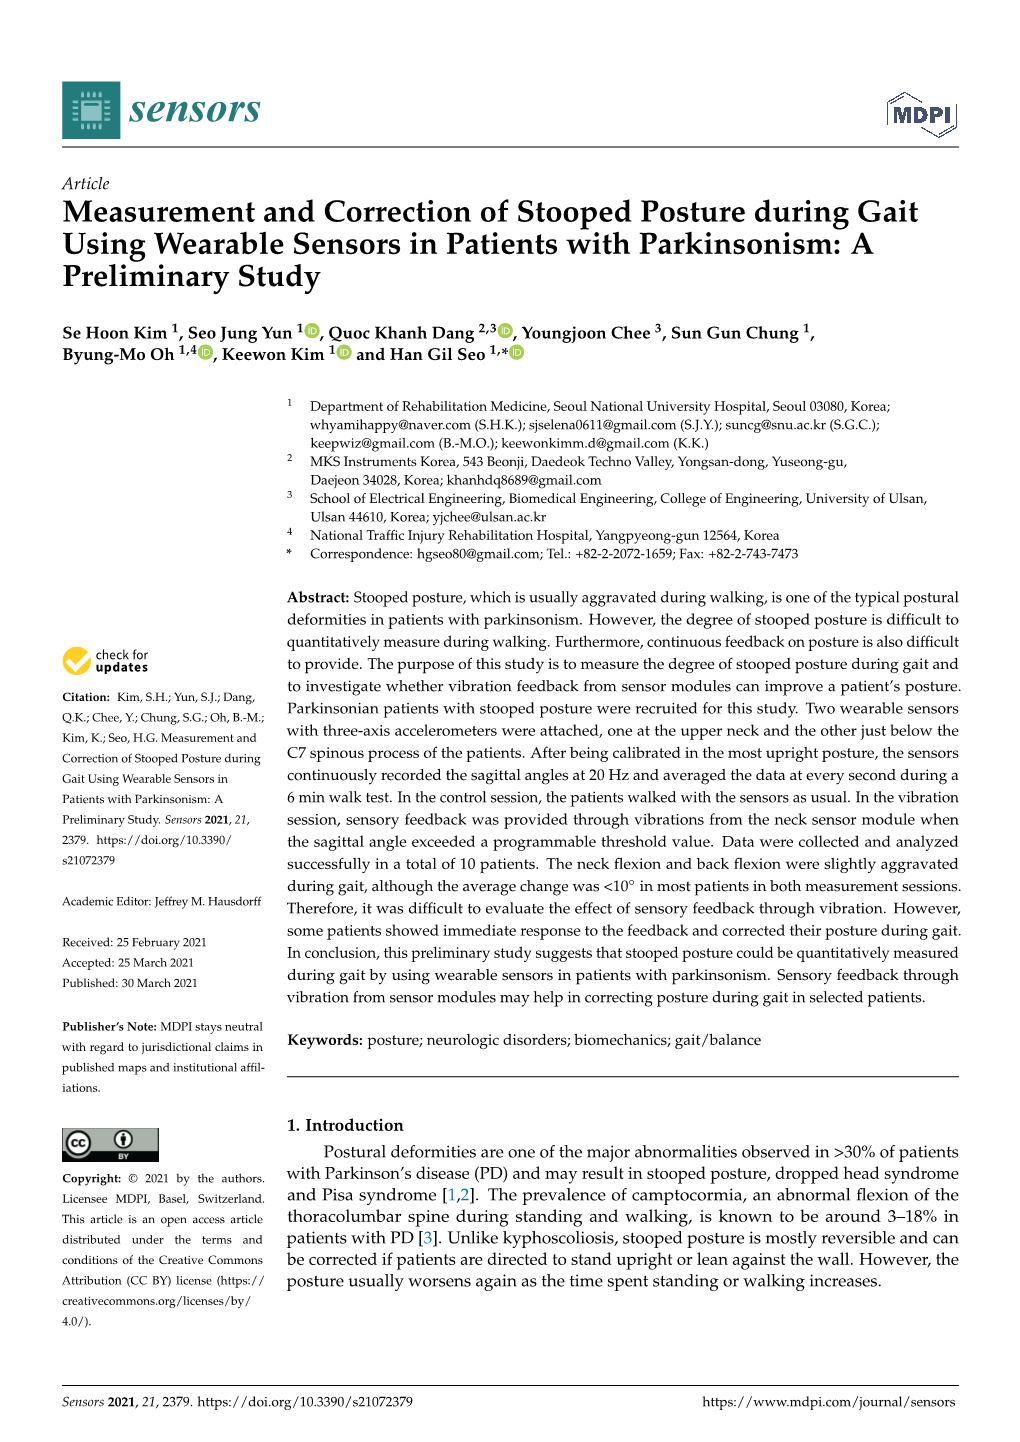 Measurement and Correction of Stooped Posture During Gait Using Wearable Sensors in Patients with Parkinsonism: a Preliminary Study